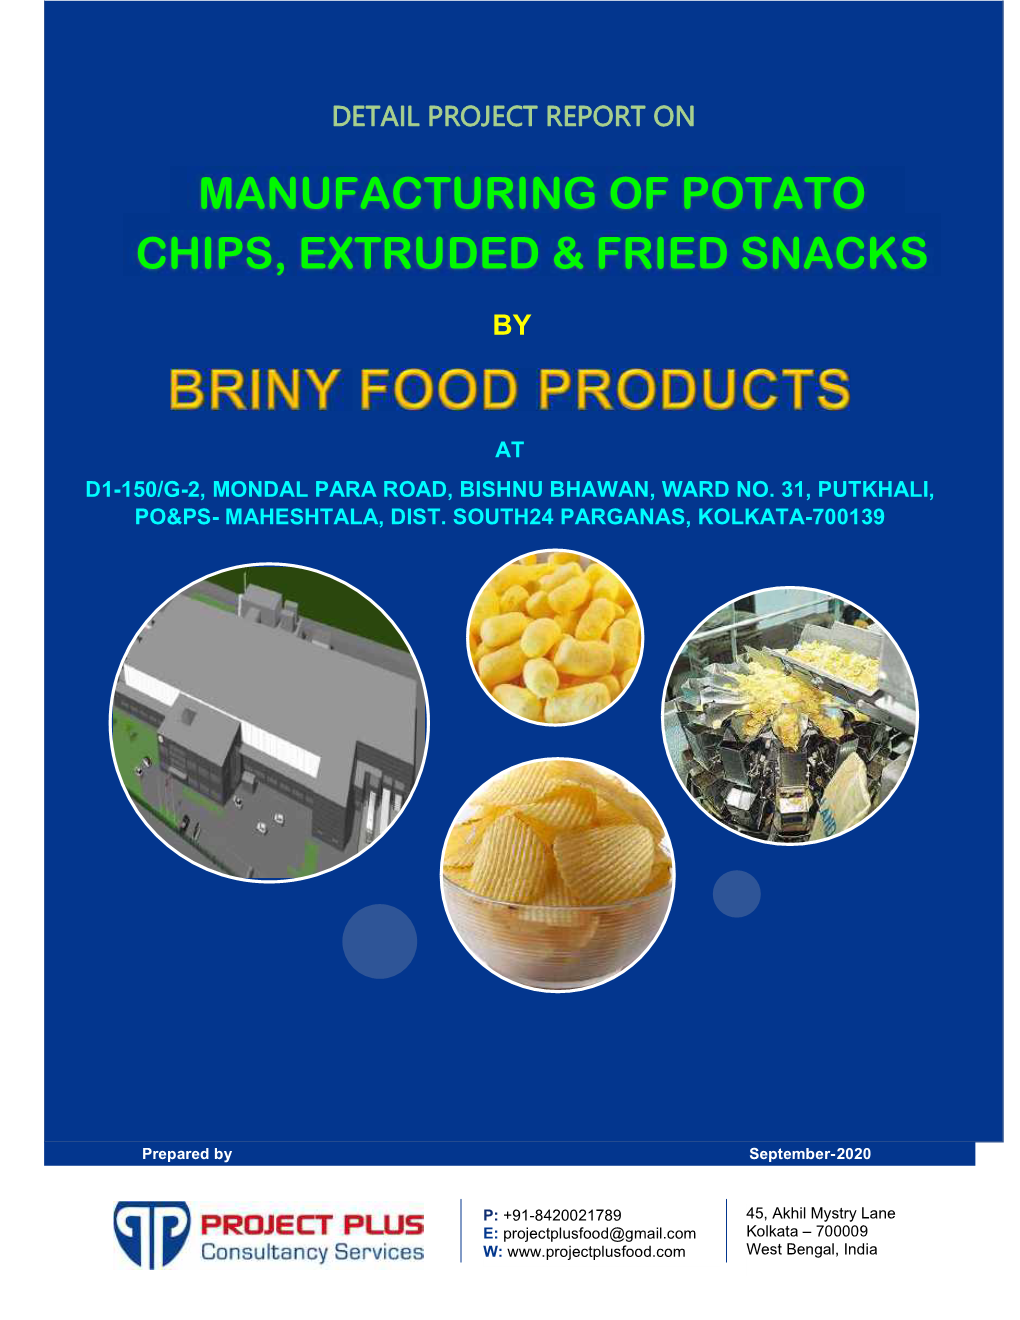 Manufacturing of Potato Chips, Extruded & Fried Snacks